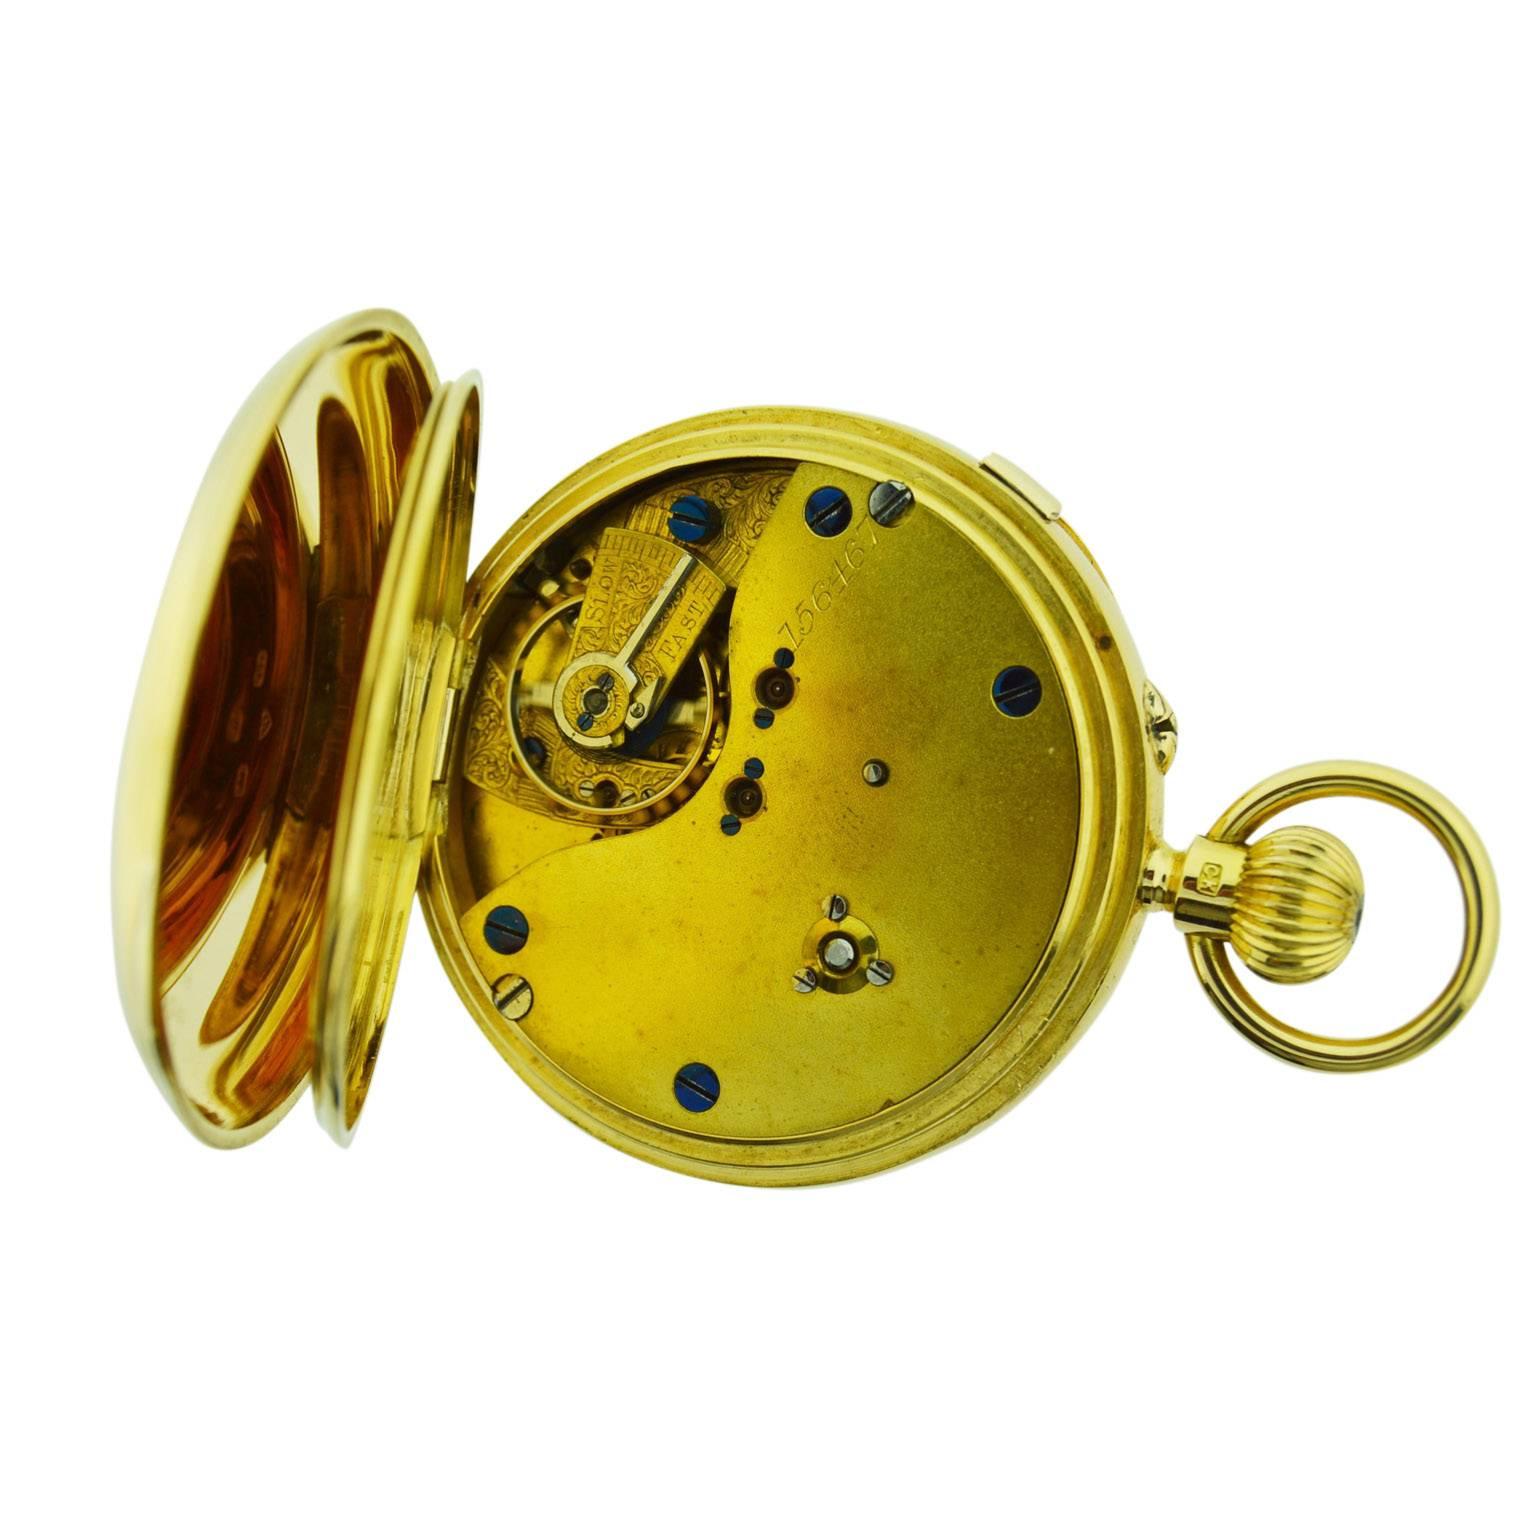 J.W. Benson 18Kt. Yellow Gold Men's Open Face Pocket Watch with Sweep Seconds 3